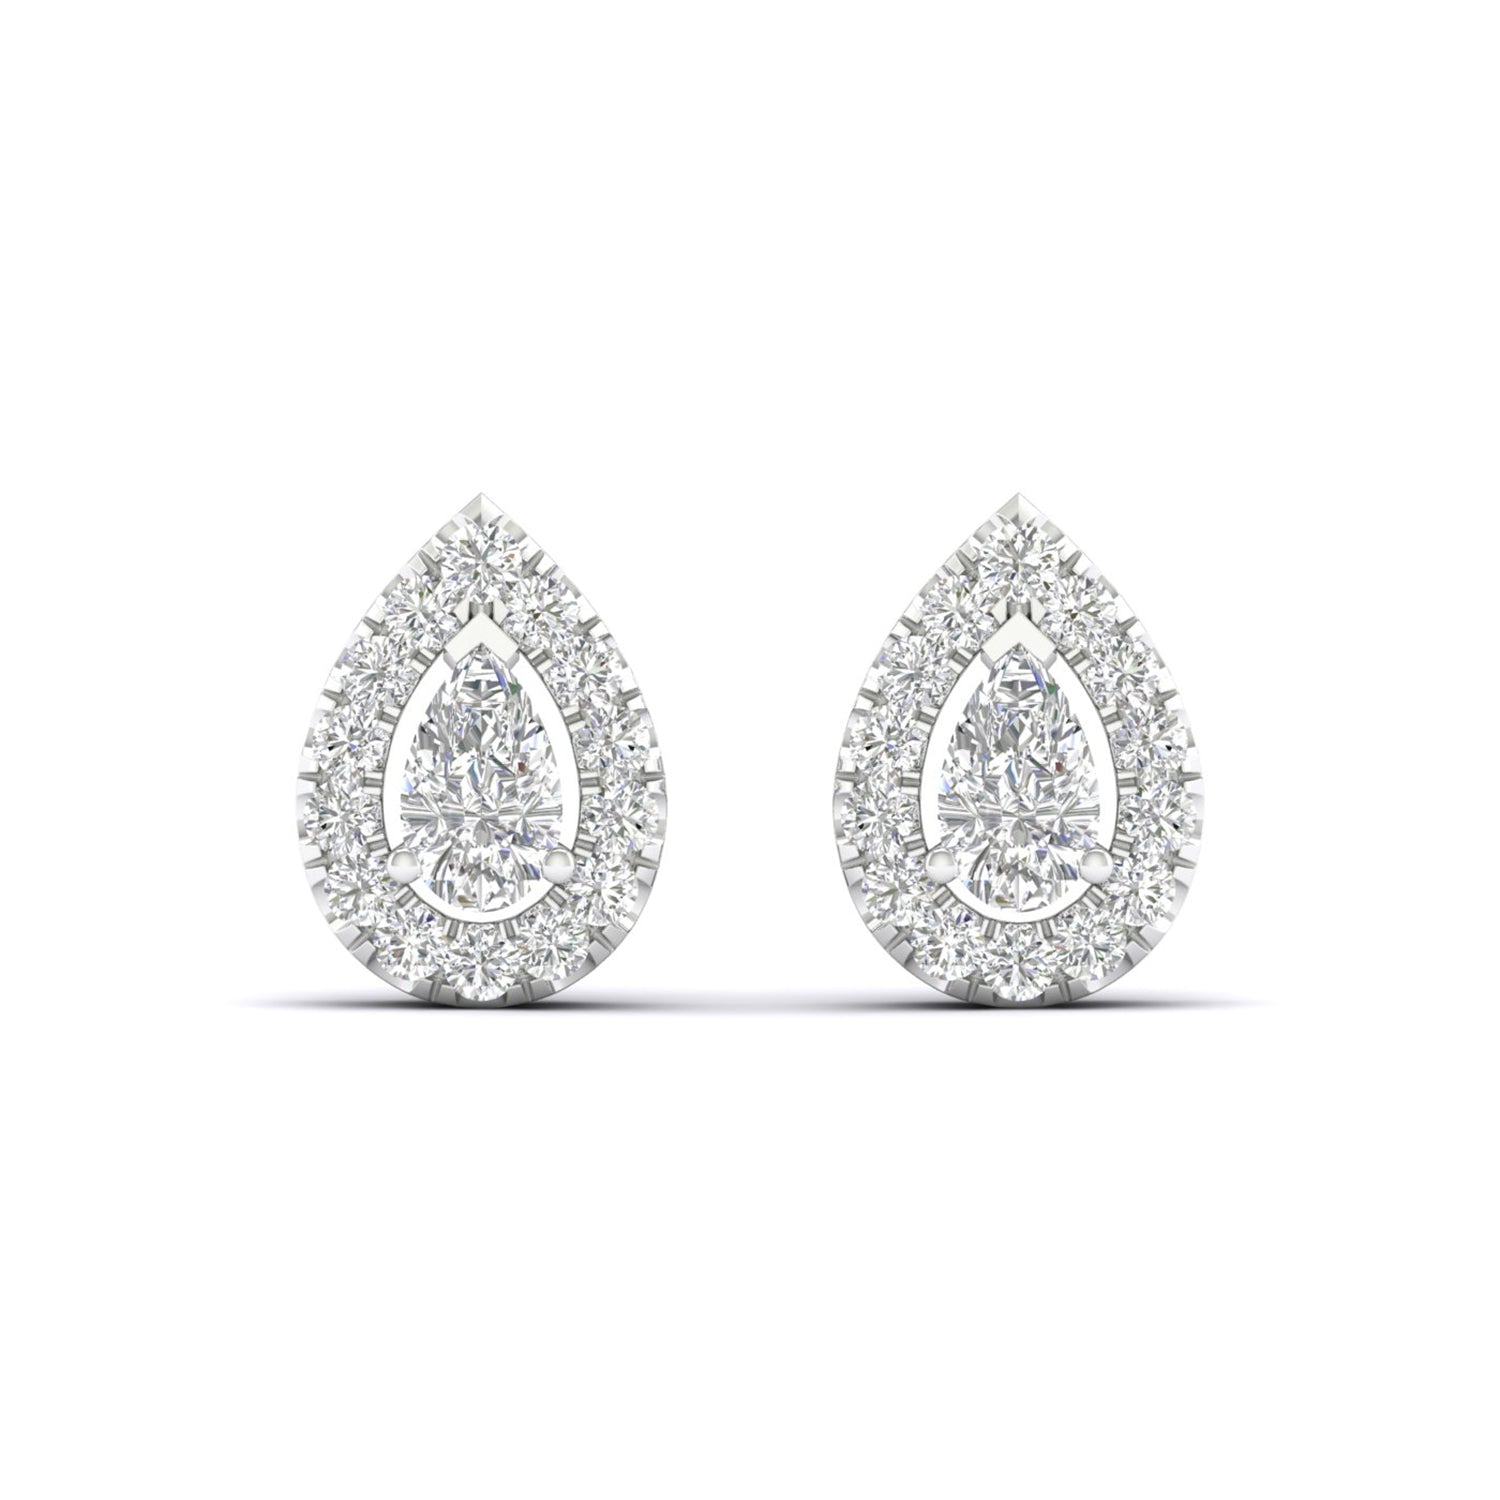 Dewdrop Halo Studs_Product Angle_1/2 Ct. - 3